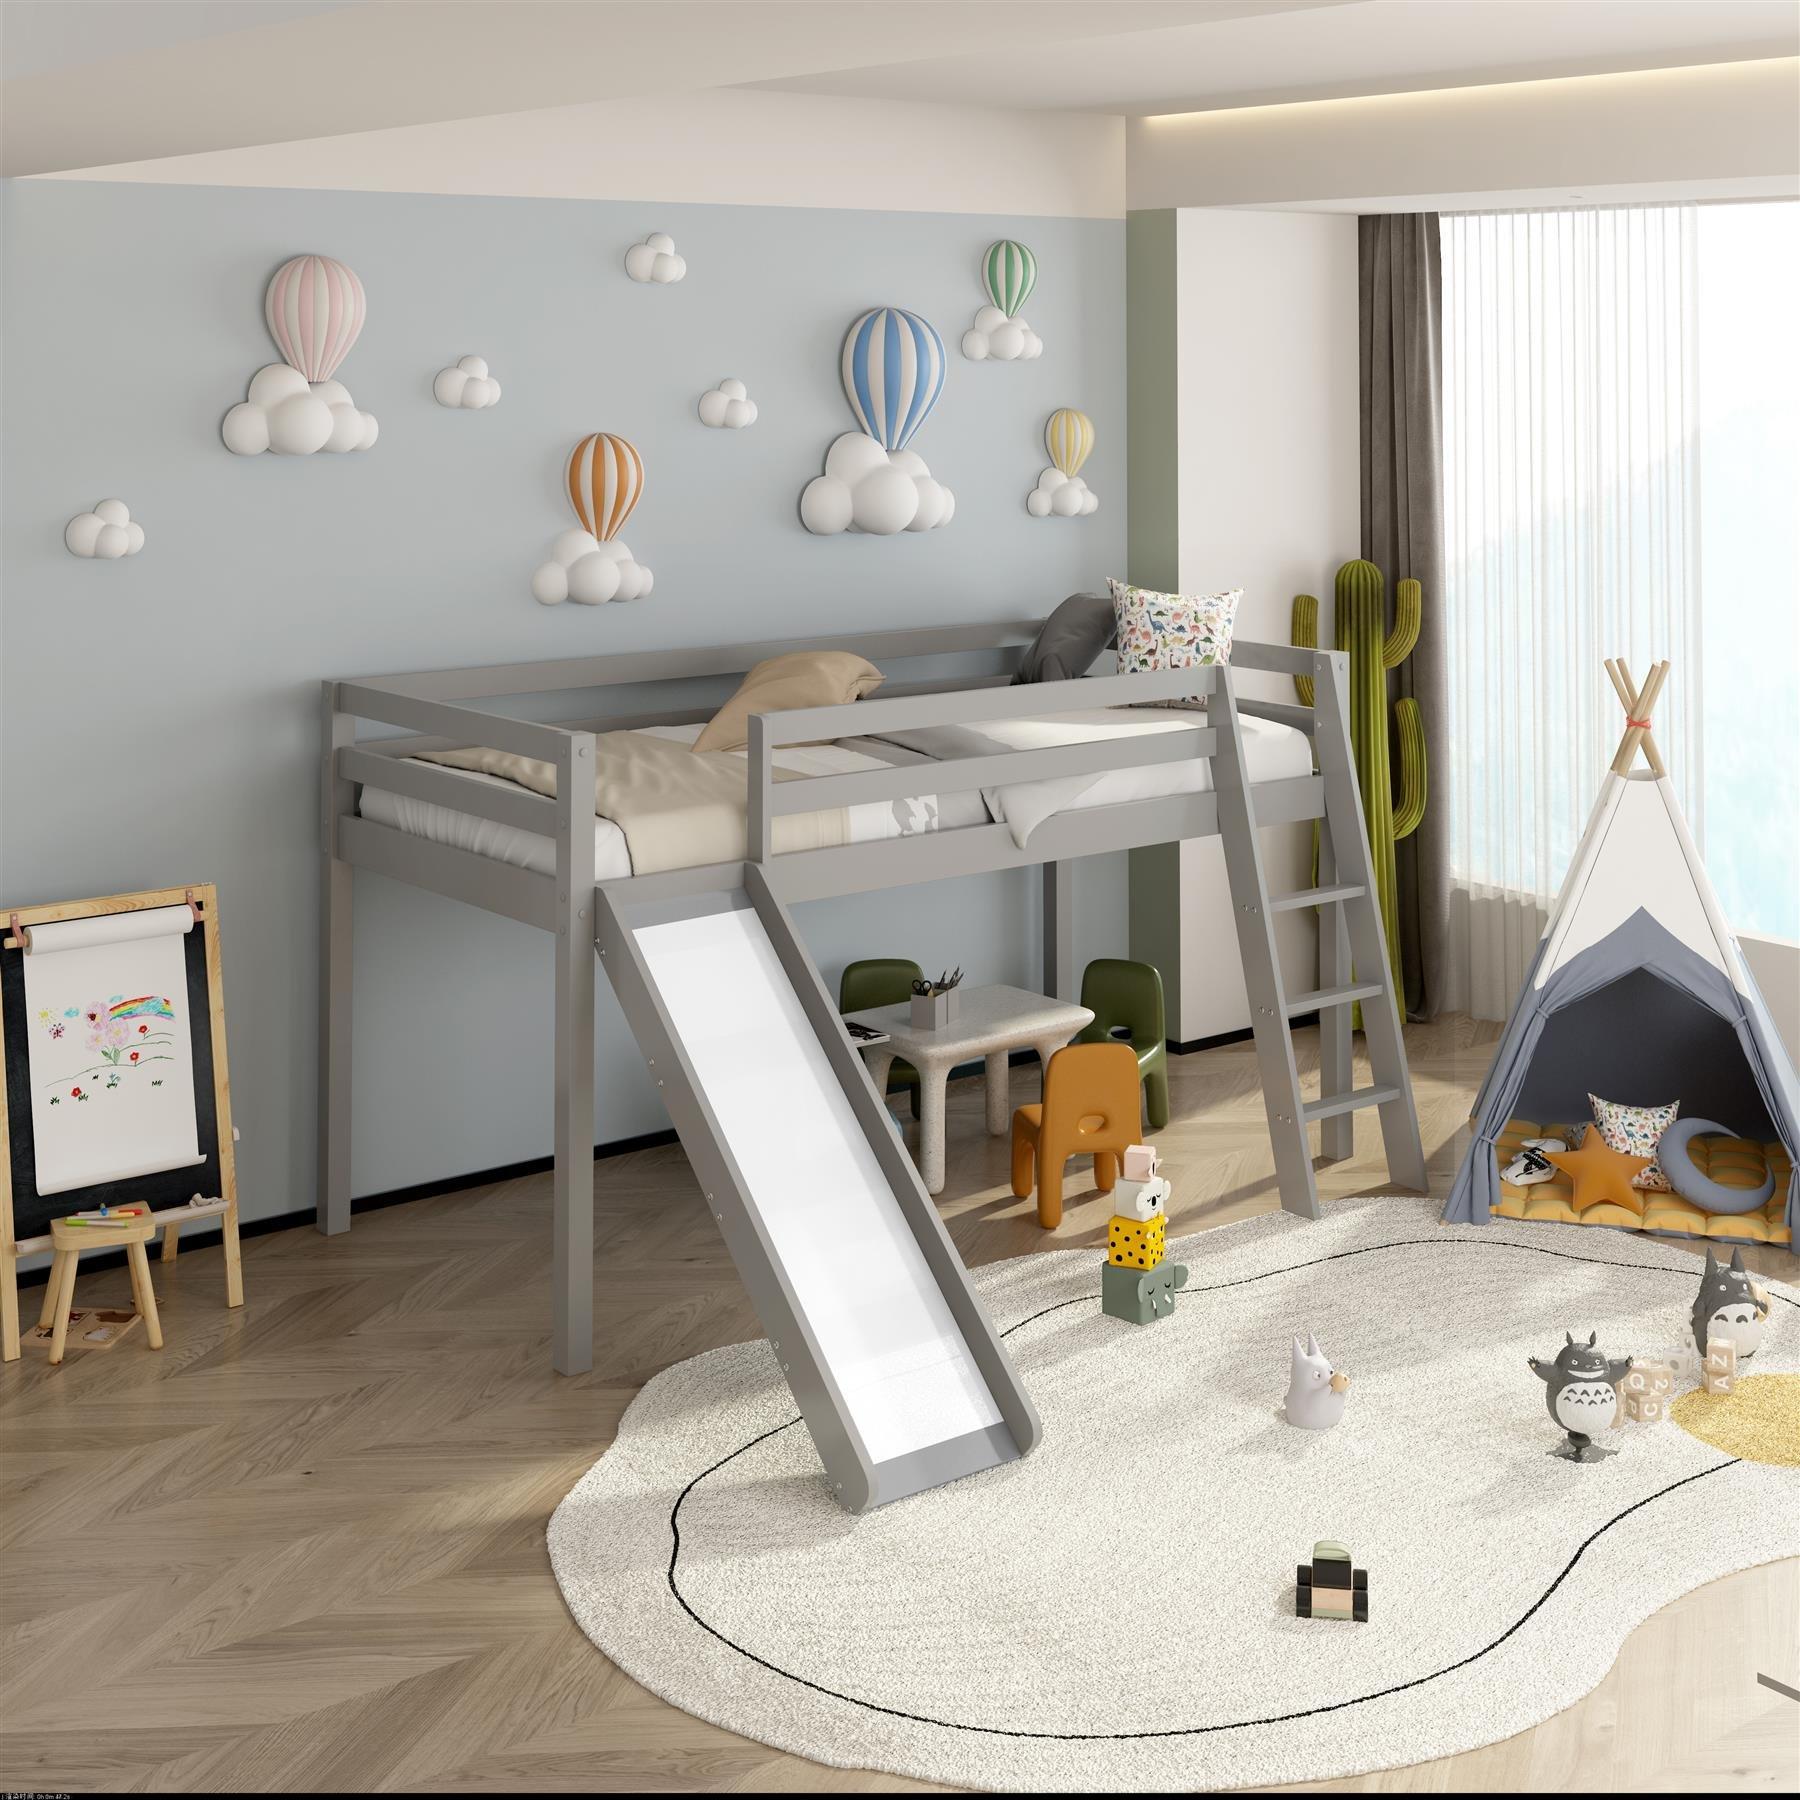 Mid Sleeper with Slide for Kids - Space-Saving, Durable, and Customisable Mid Sleeper with Slide for